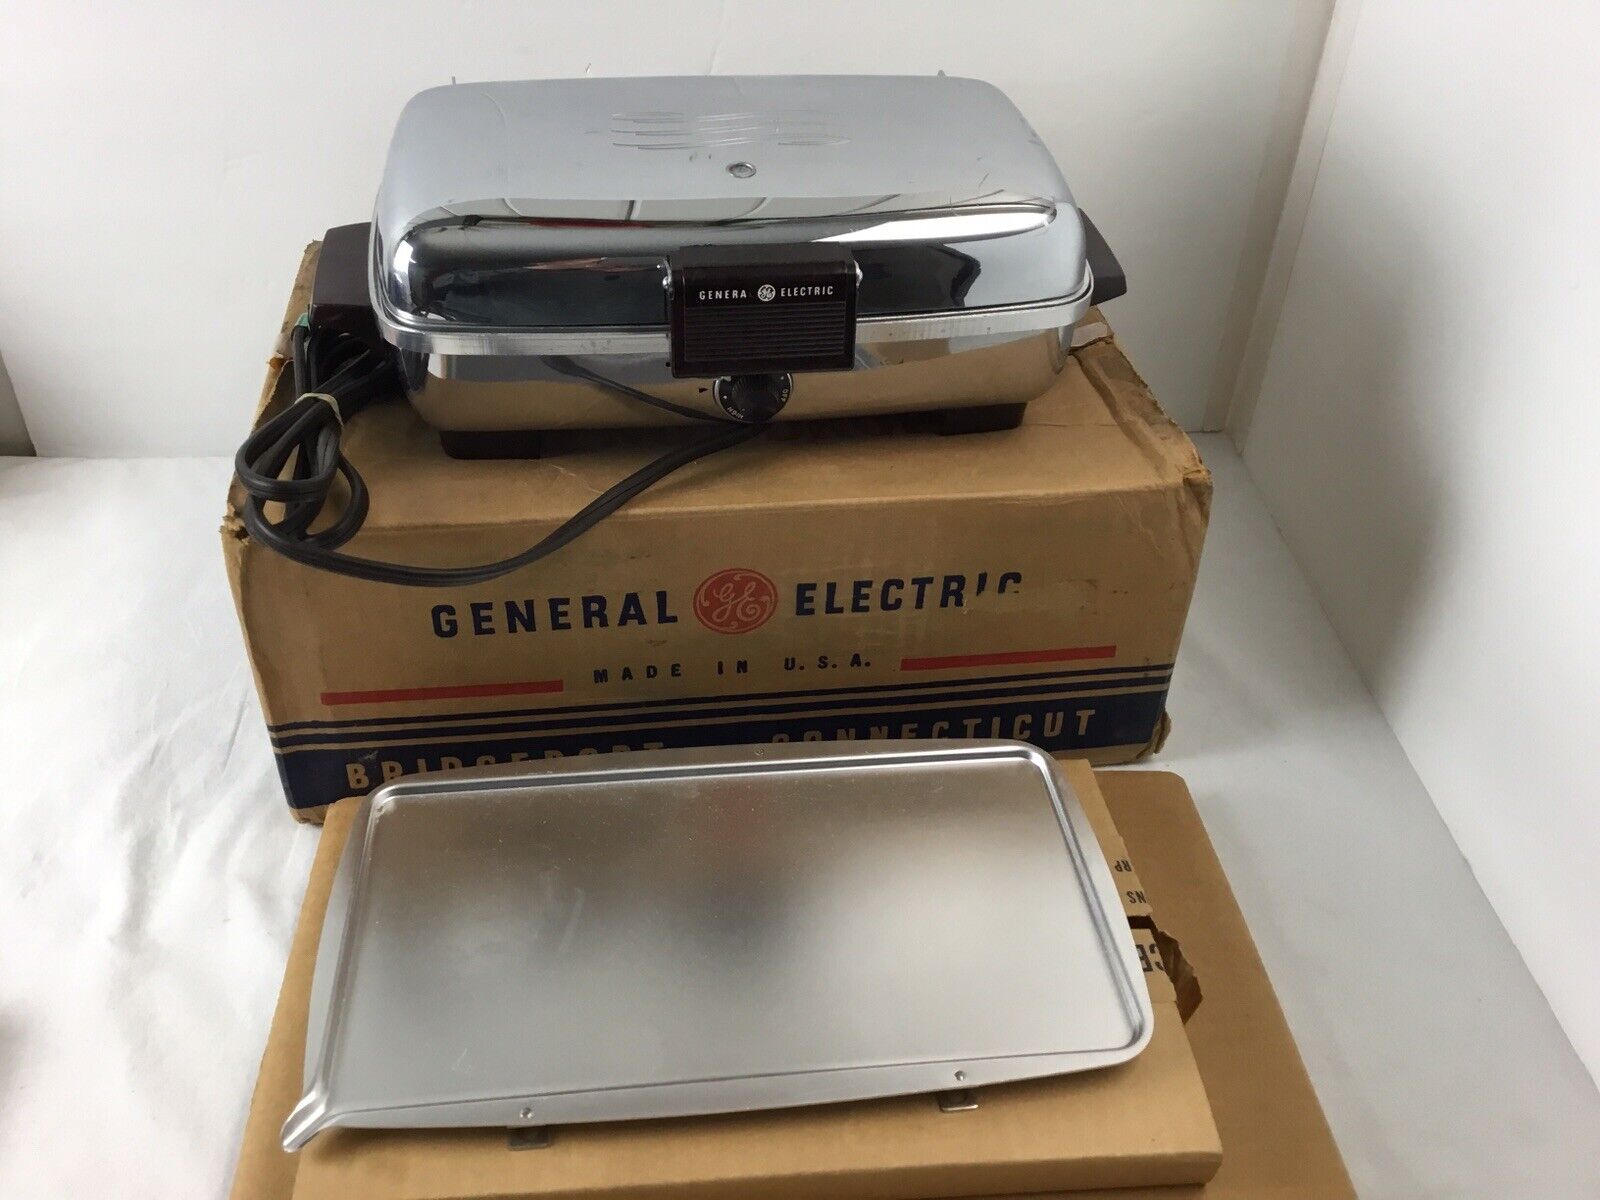 New Vintage GE General Electric Sandwich Grill Waffle Baker Iron 179G40 179